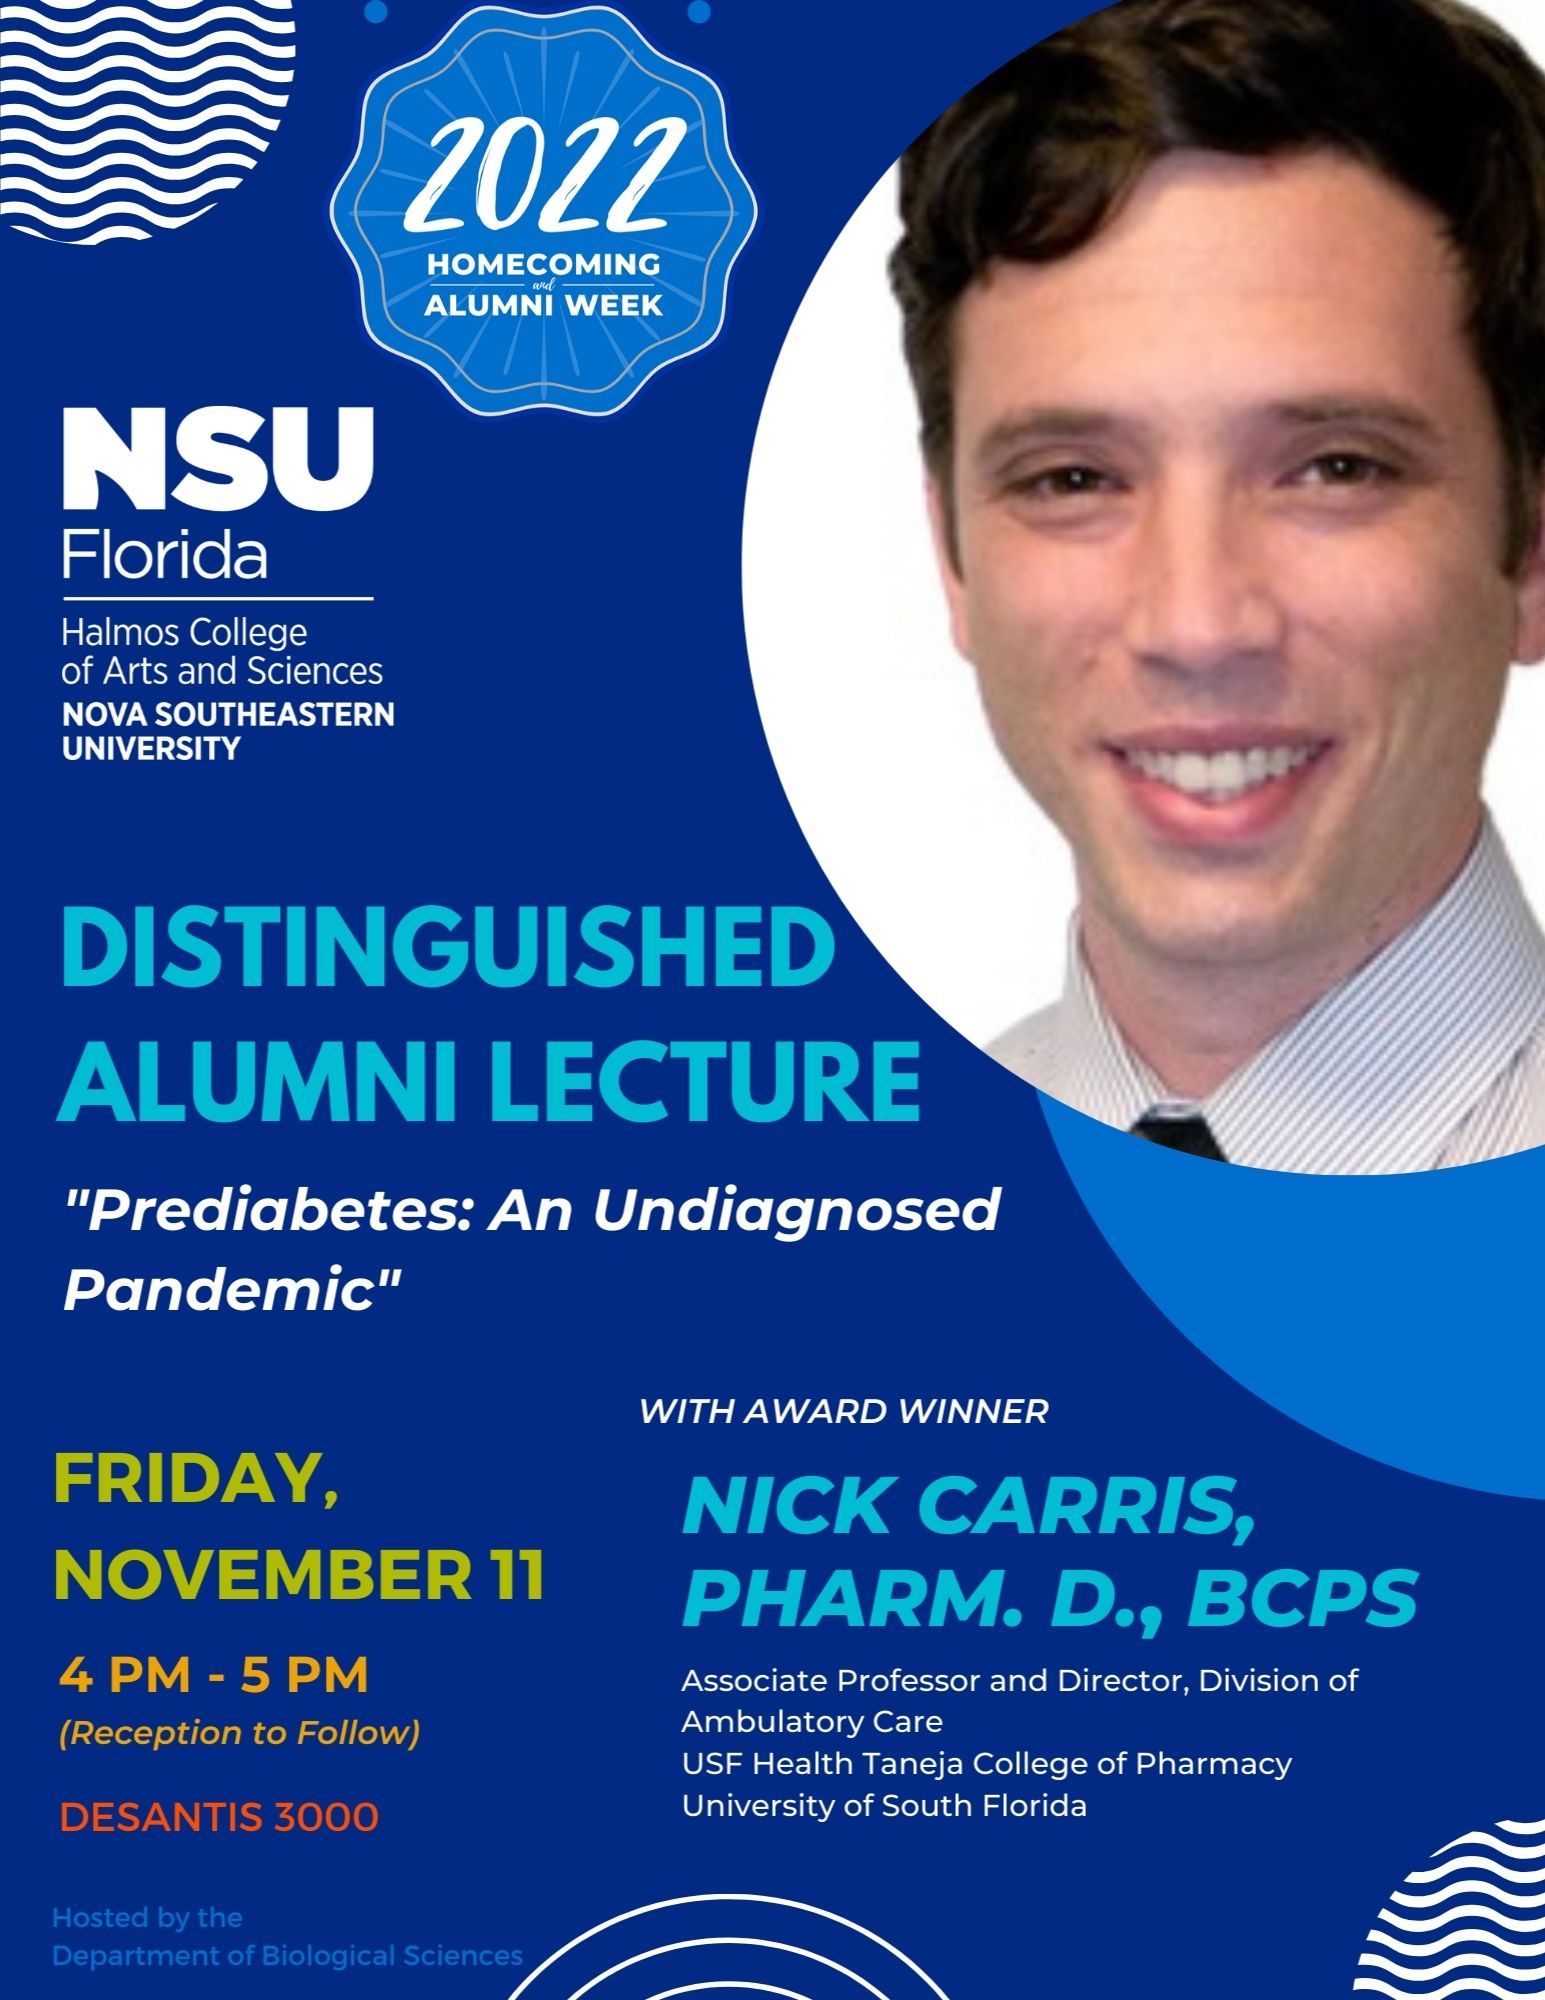 2022 Alumni Lecture - Nick Carris as he discusses the pre-diabetes pandemic